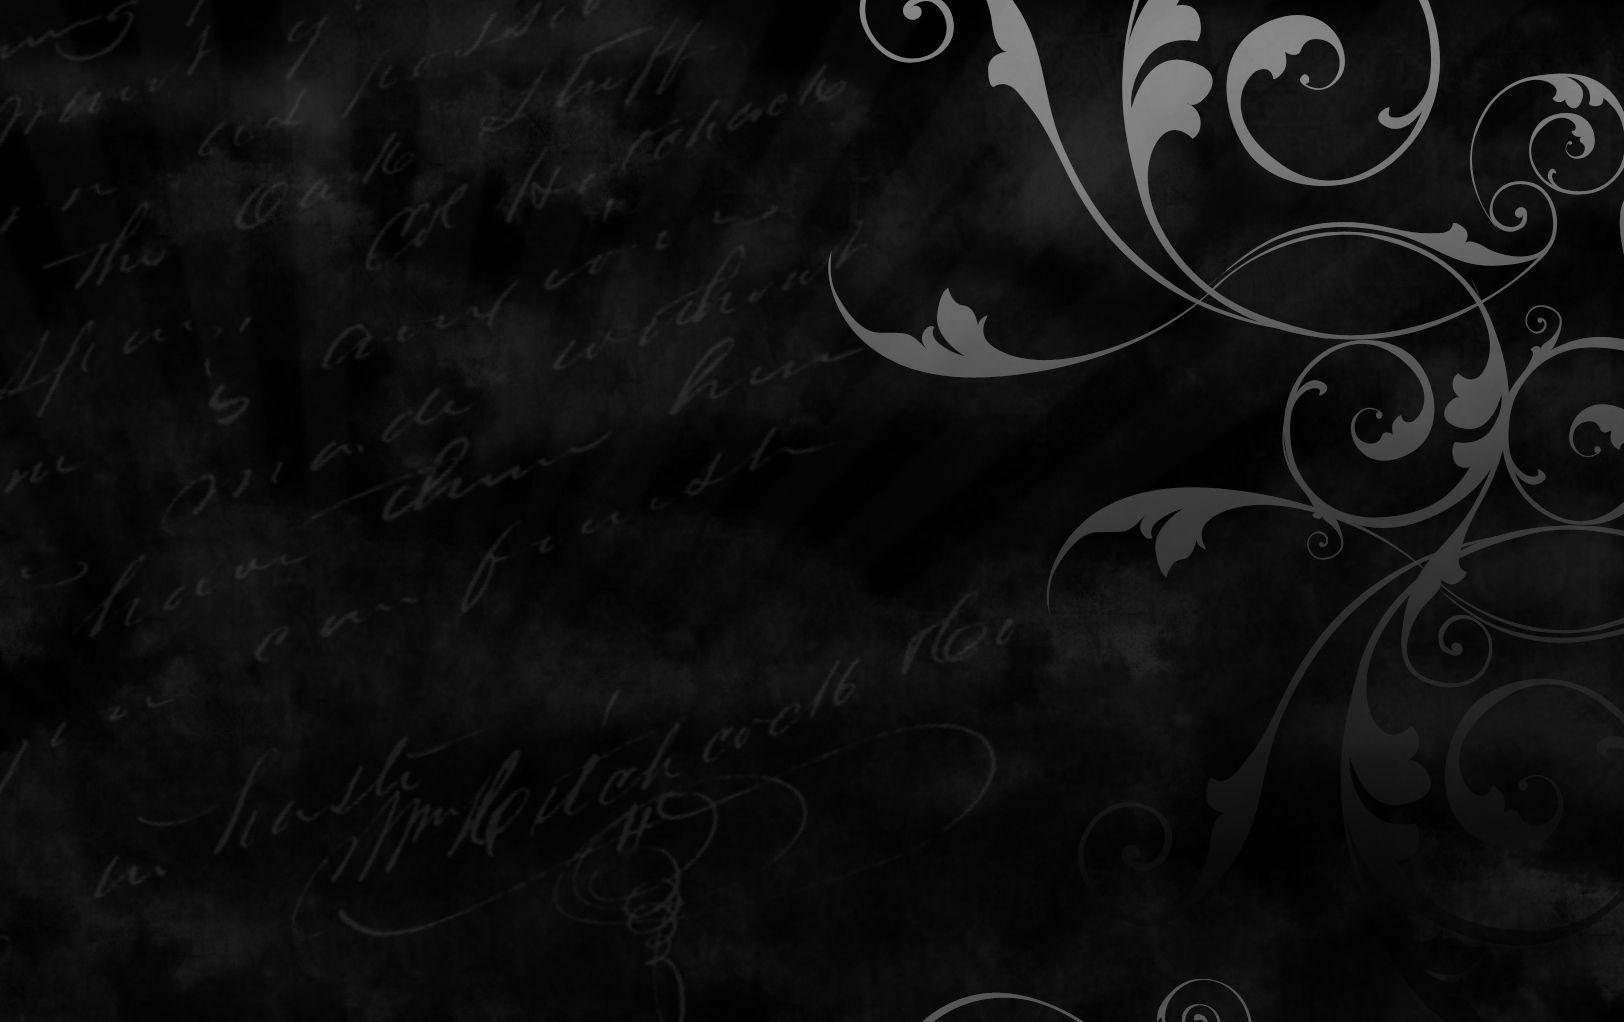 Awesome Abstract Wallpaper Black Wallpaper. coverhdwallpaper